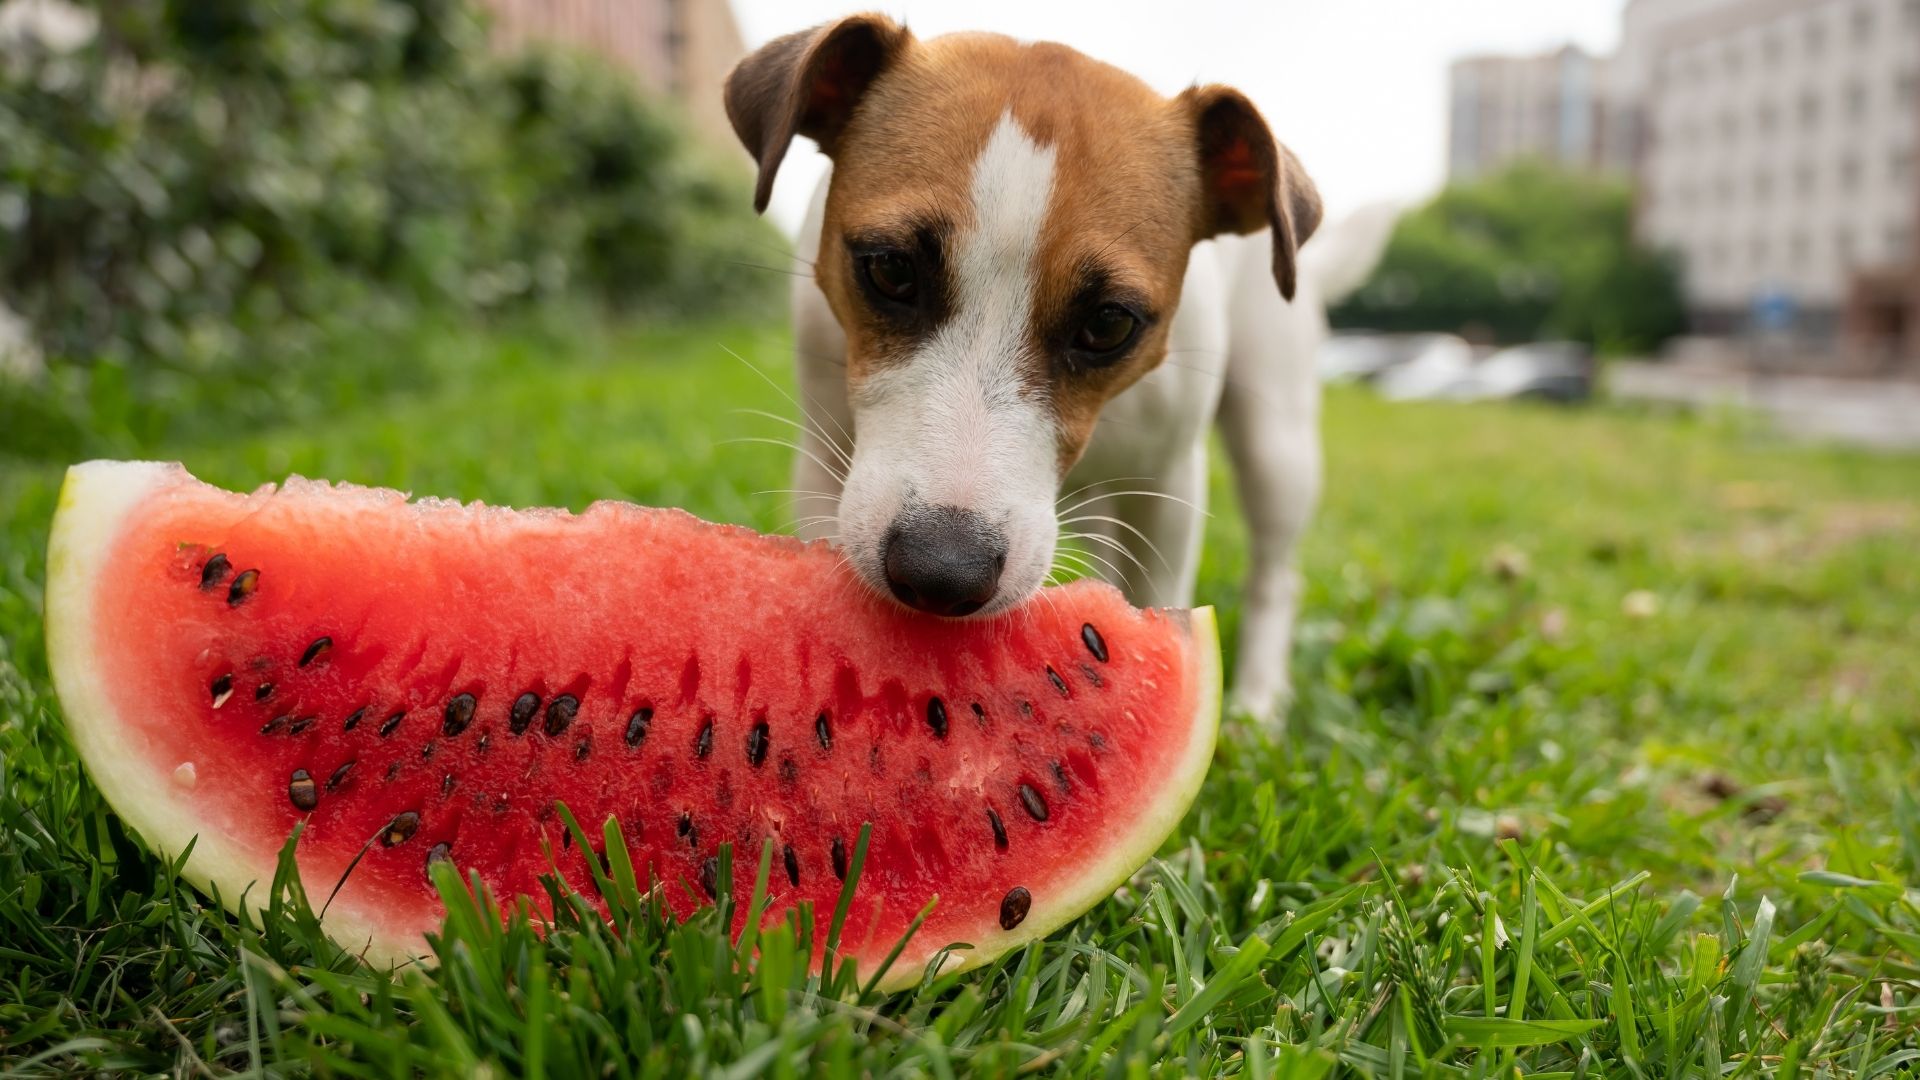 How much watermelon can a puppy eat?